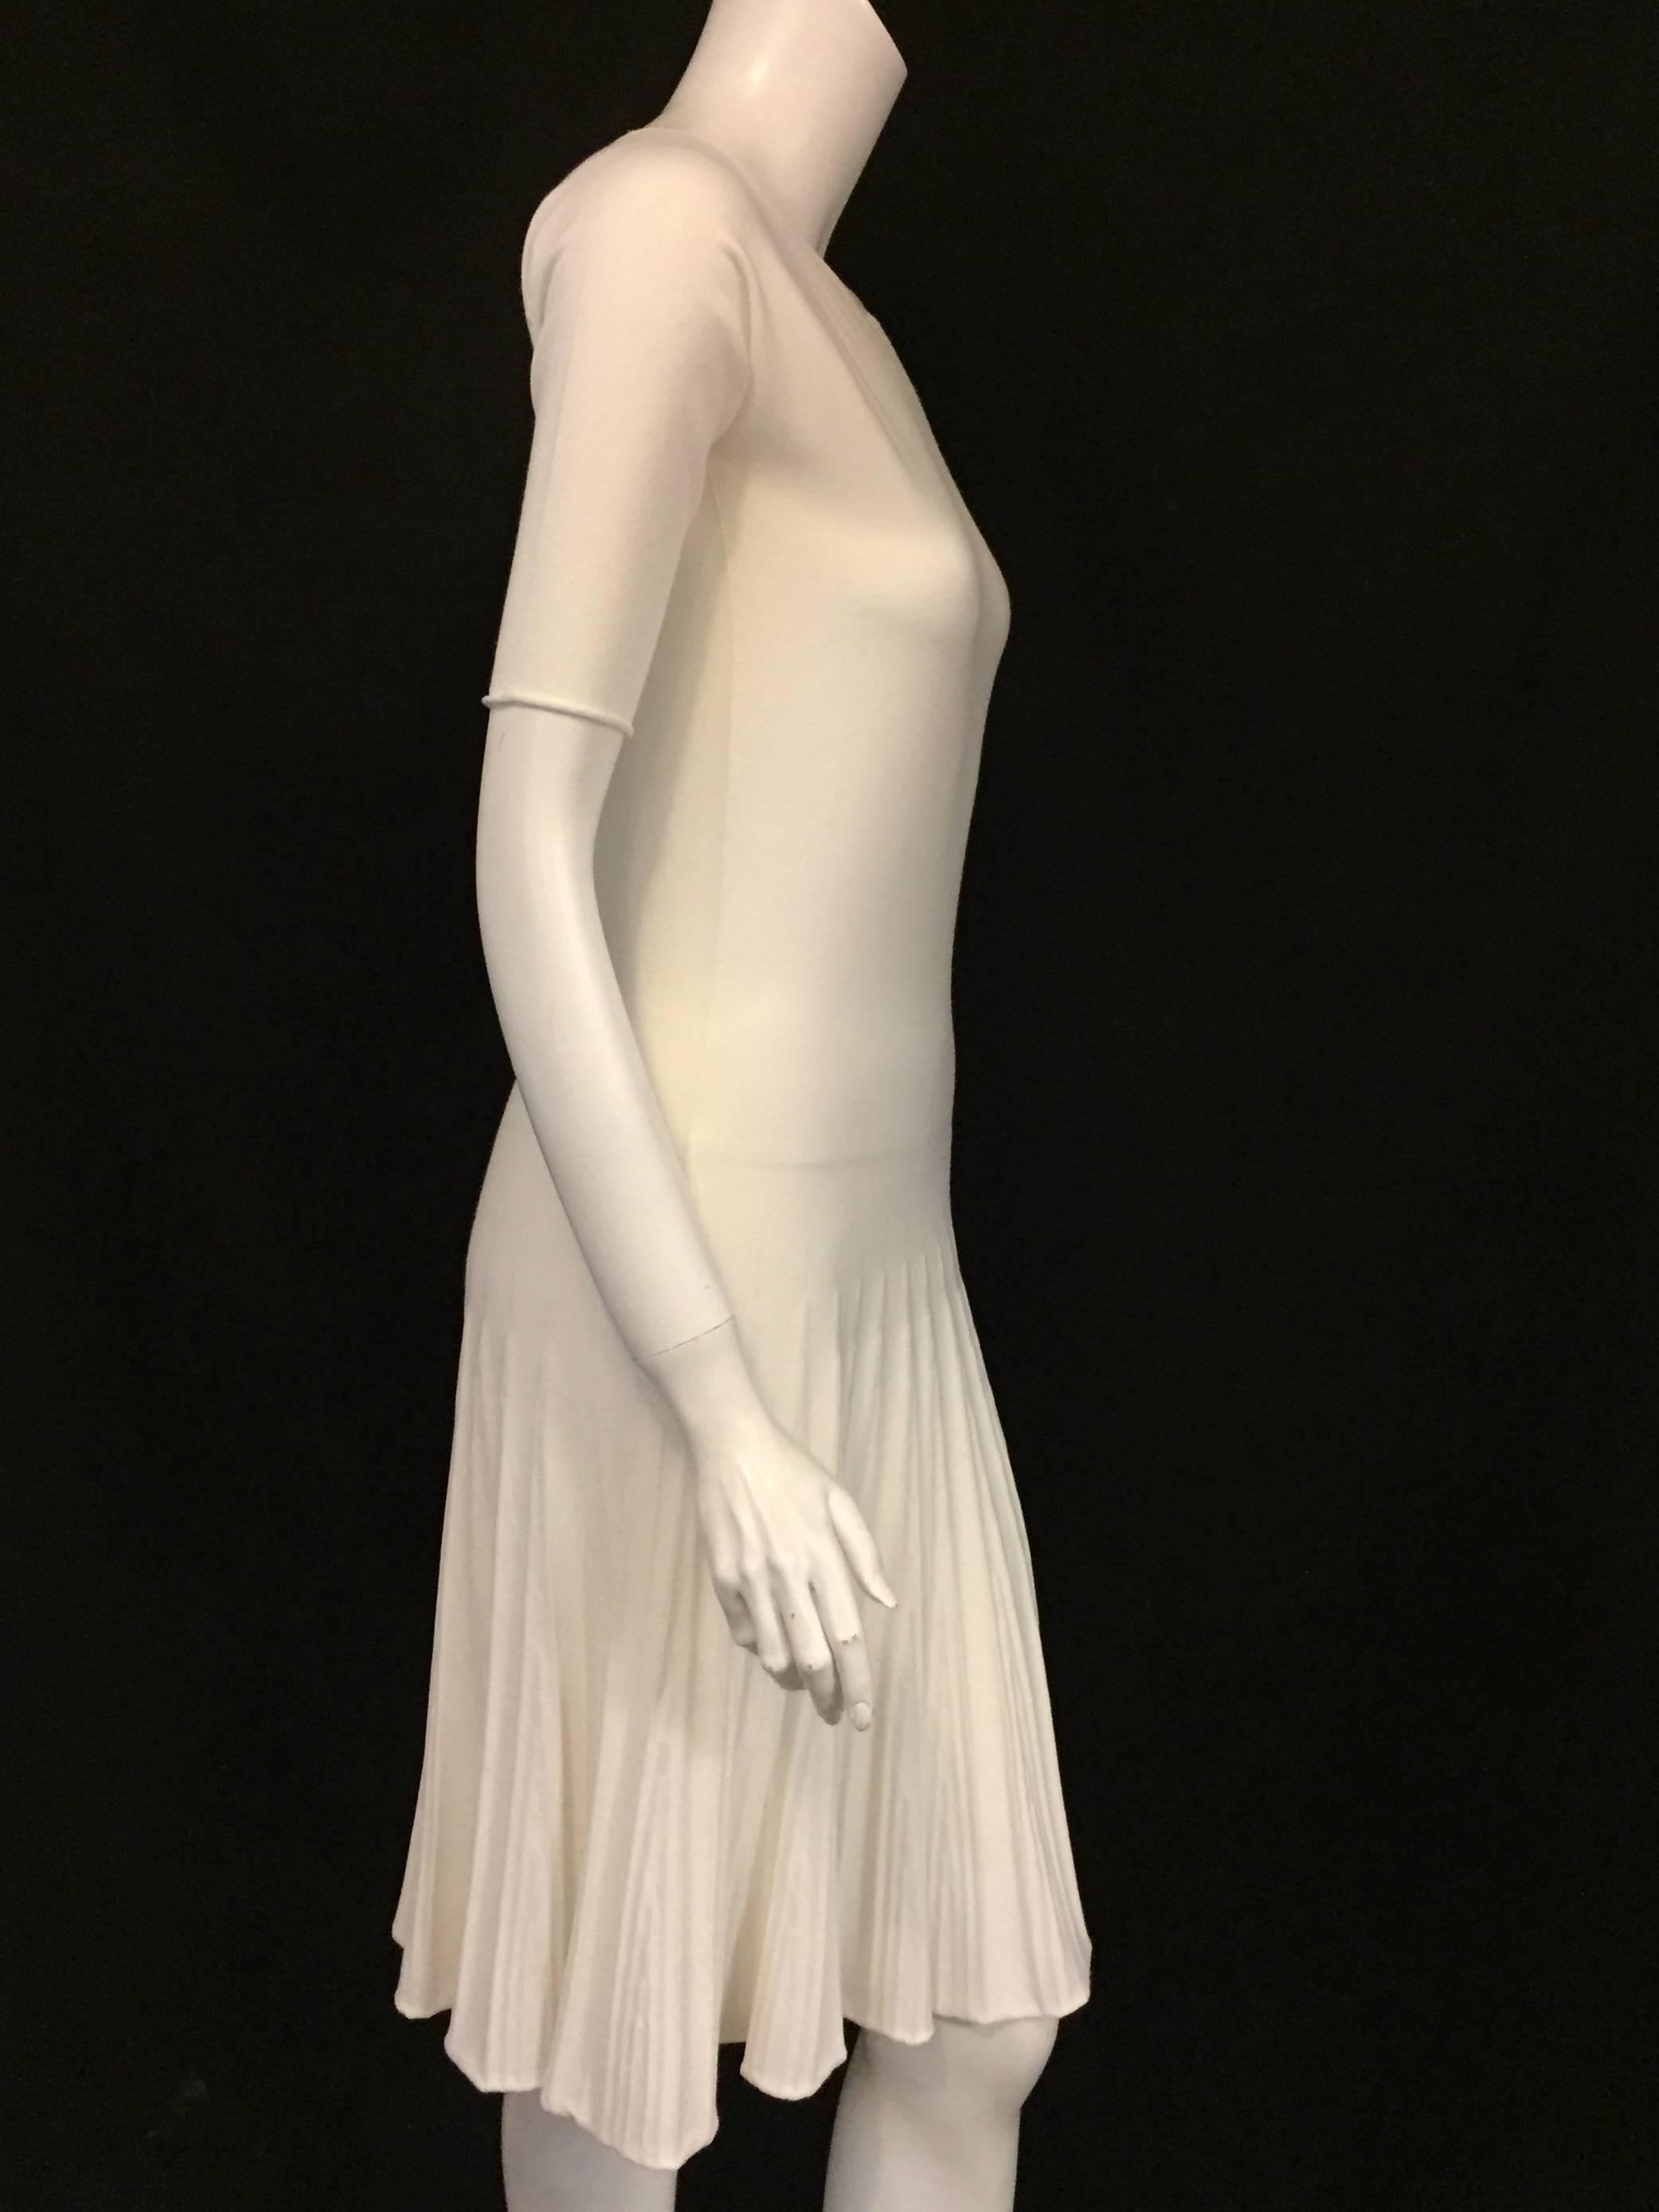 Remarkable Armani Ivory Dress with tapered sleeves to just above the elbows.  The faux pleats at the bottom of the dress give it a playful twirl at the hem, a classically and vivacious Armani signature.  Minimalist and discreet but ready to be